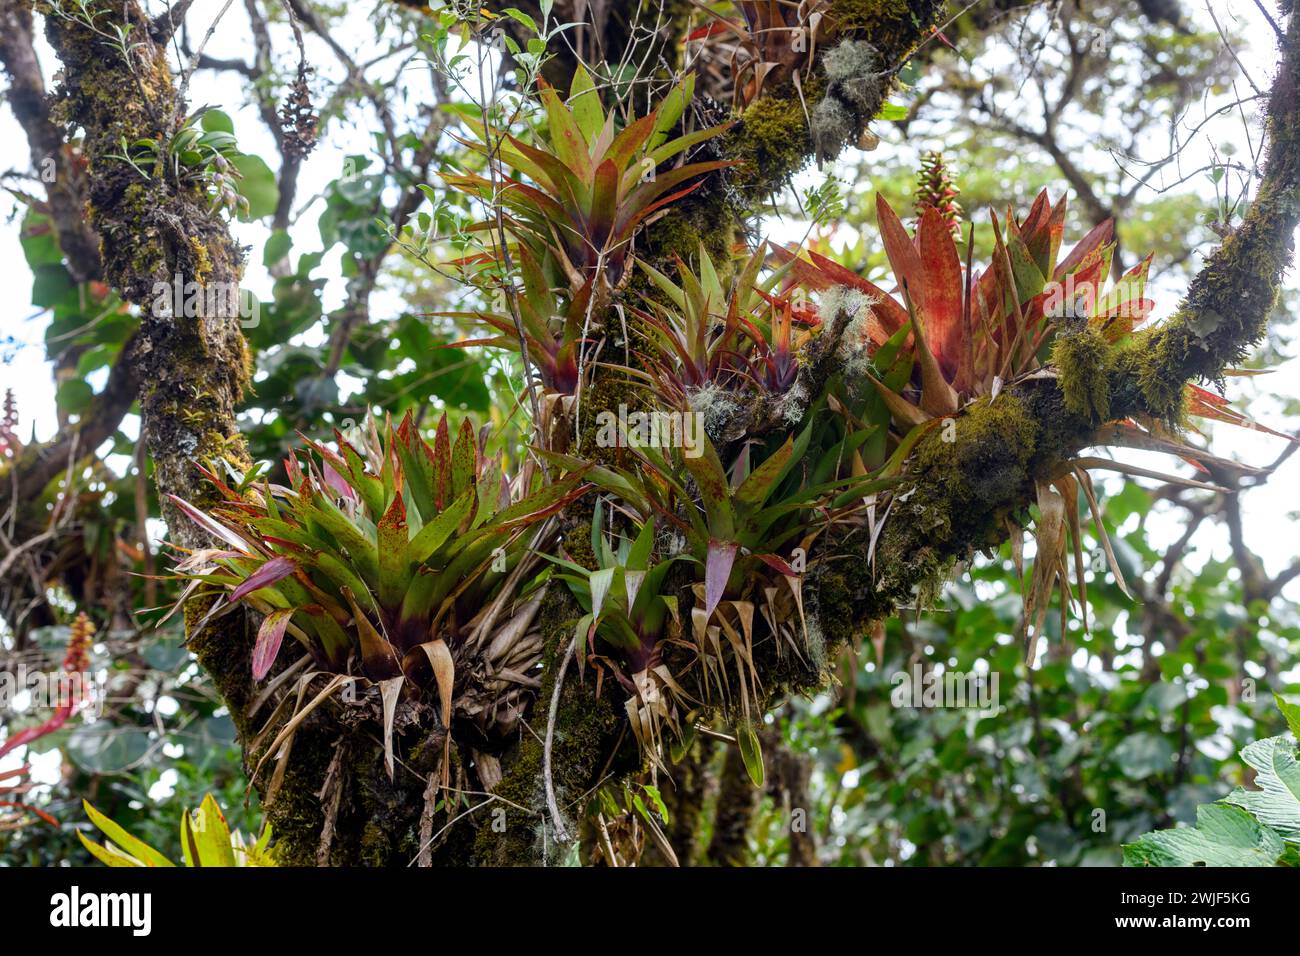 Bromeliads and other epiphytic plants in the cloud forest near Monteverde, Costa Rica at about 1000 m elevation. Stock Photo